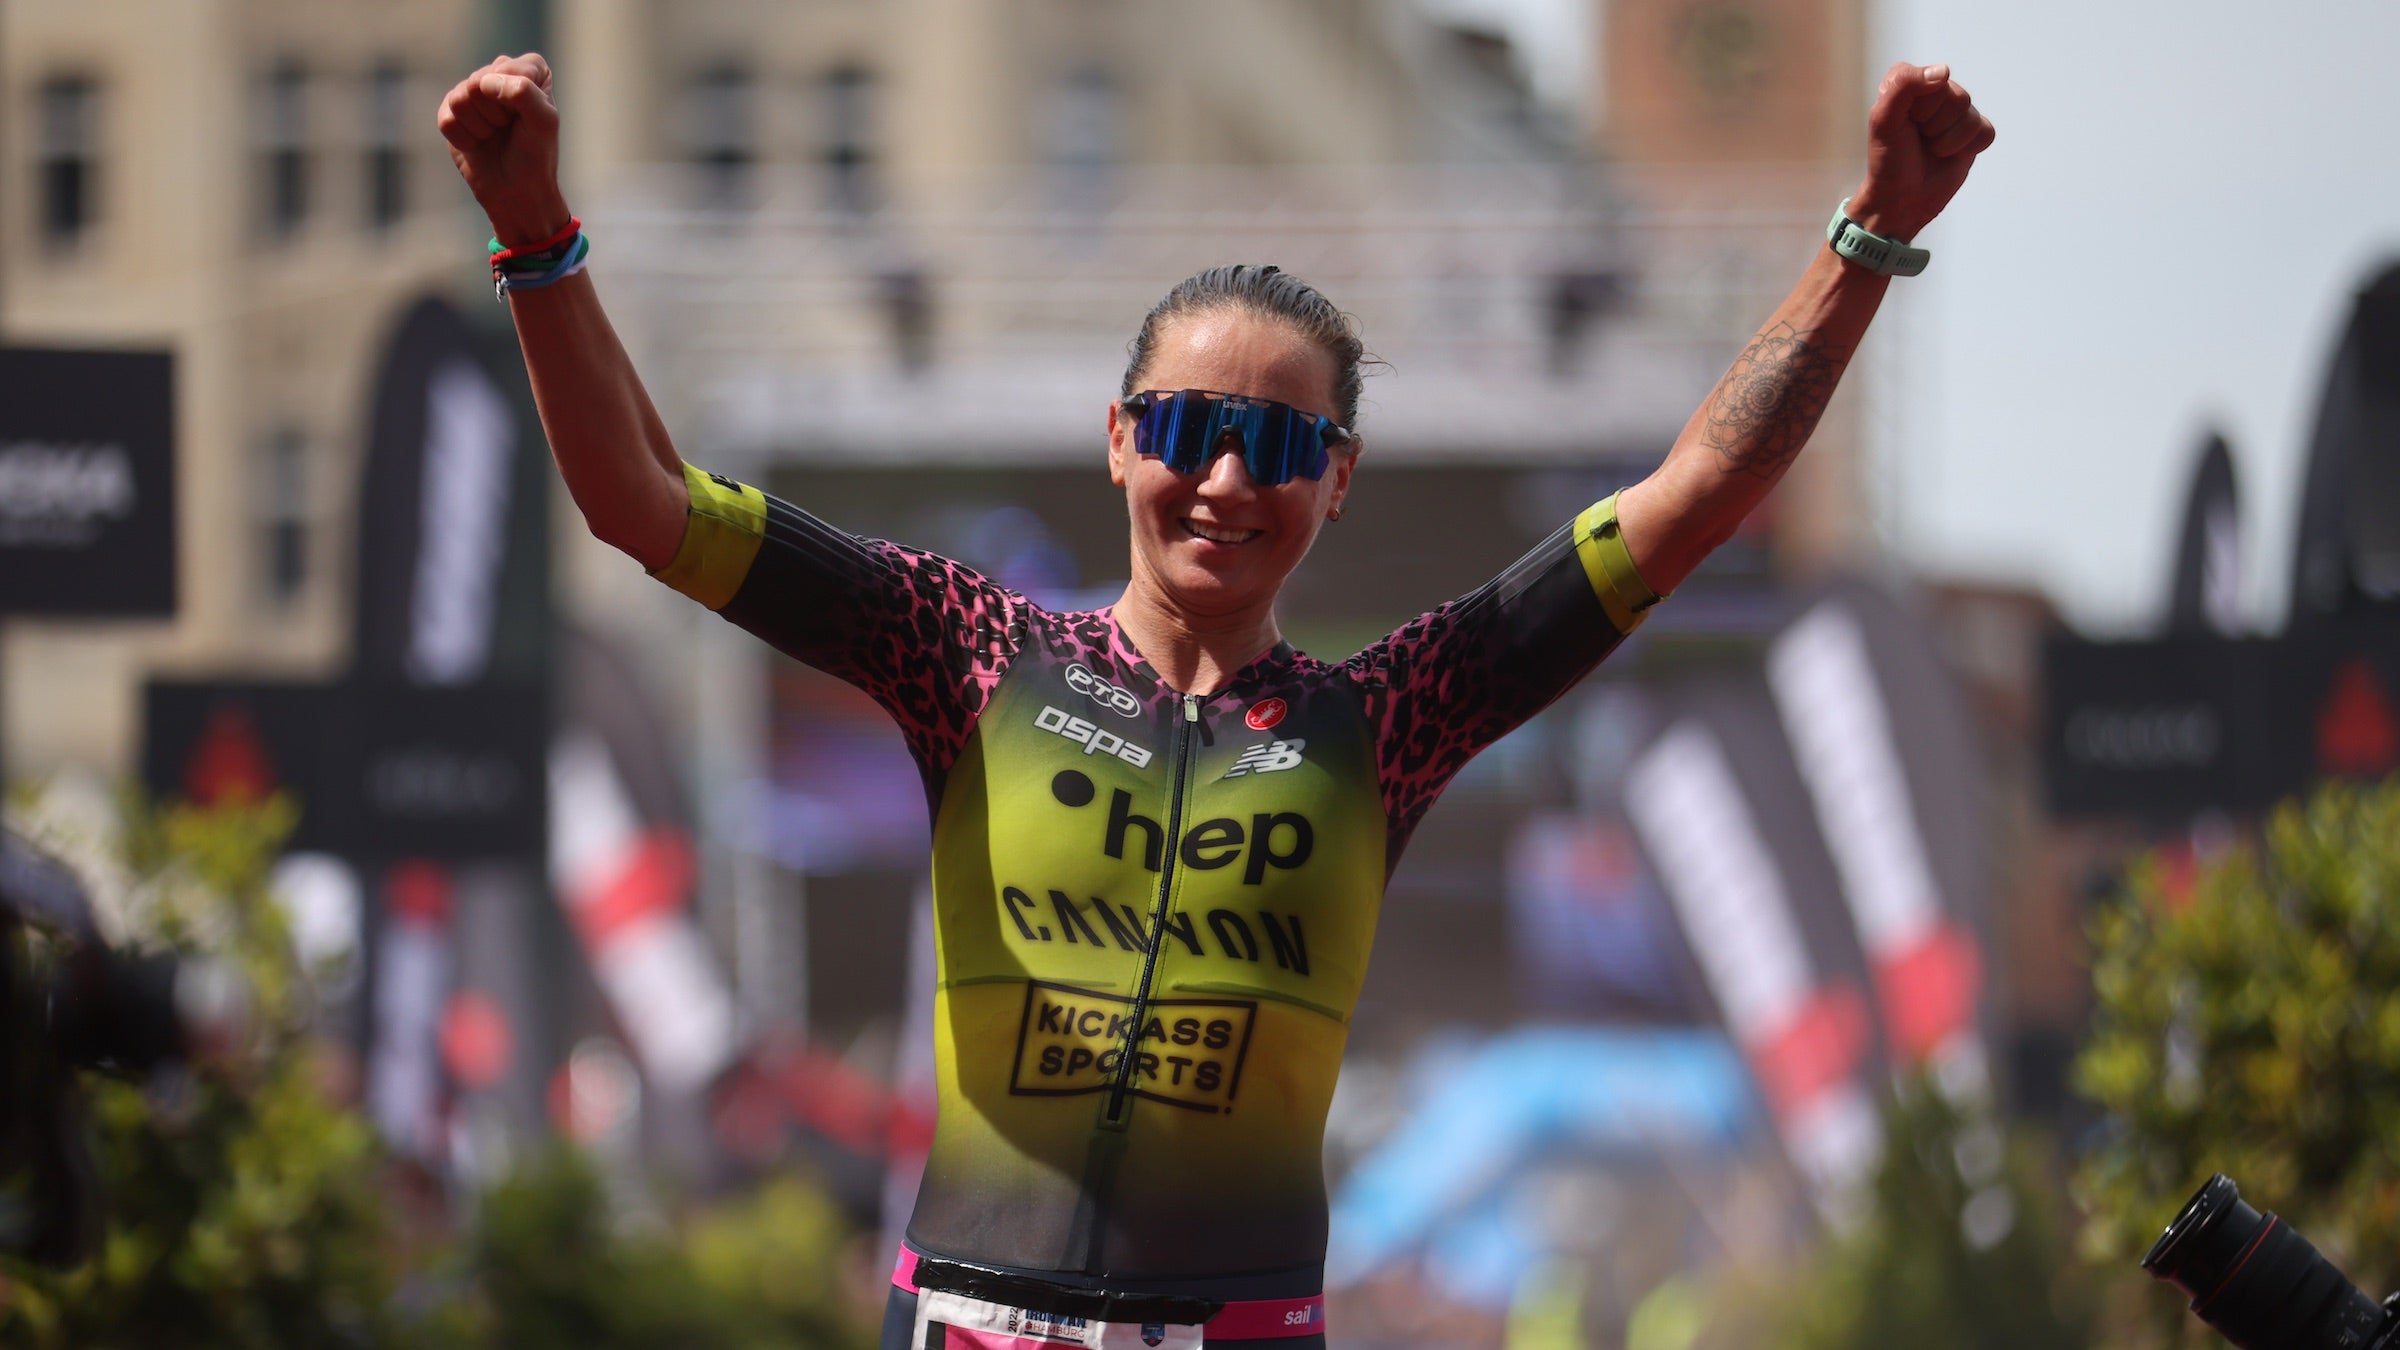 Laura Philipp, one of the contenders for Kona 2022